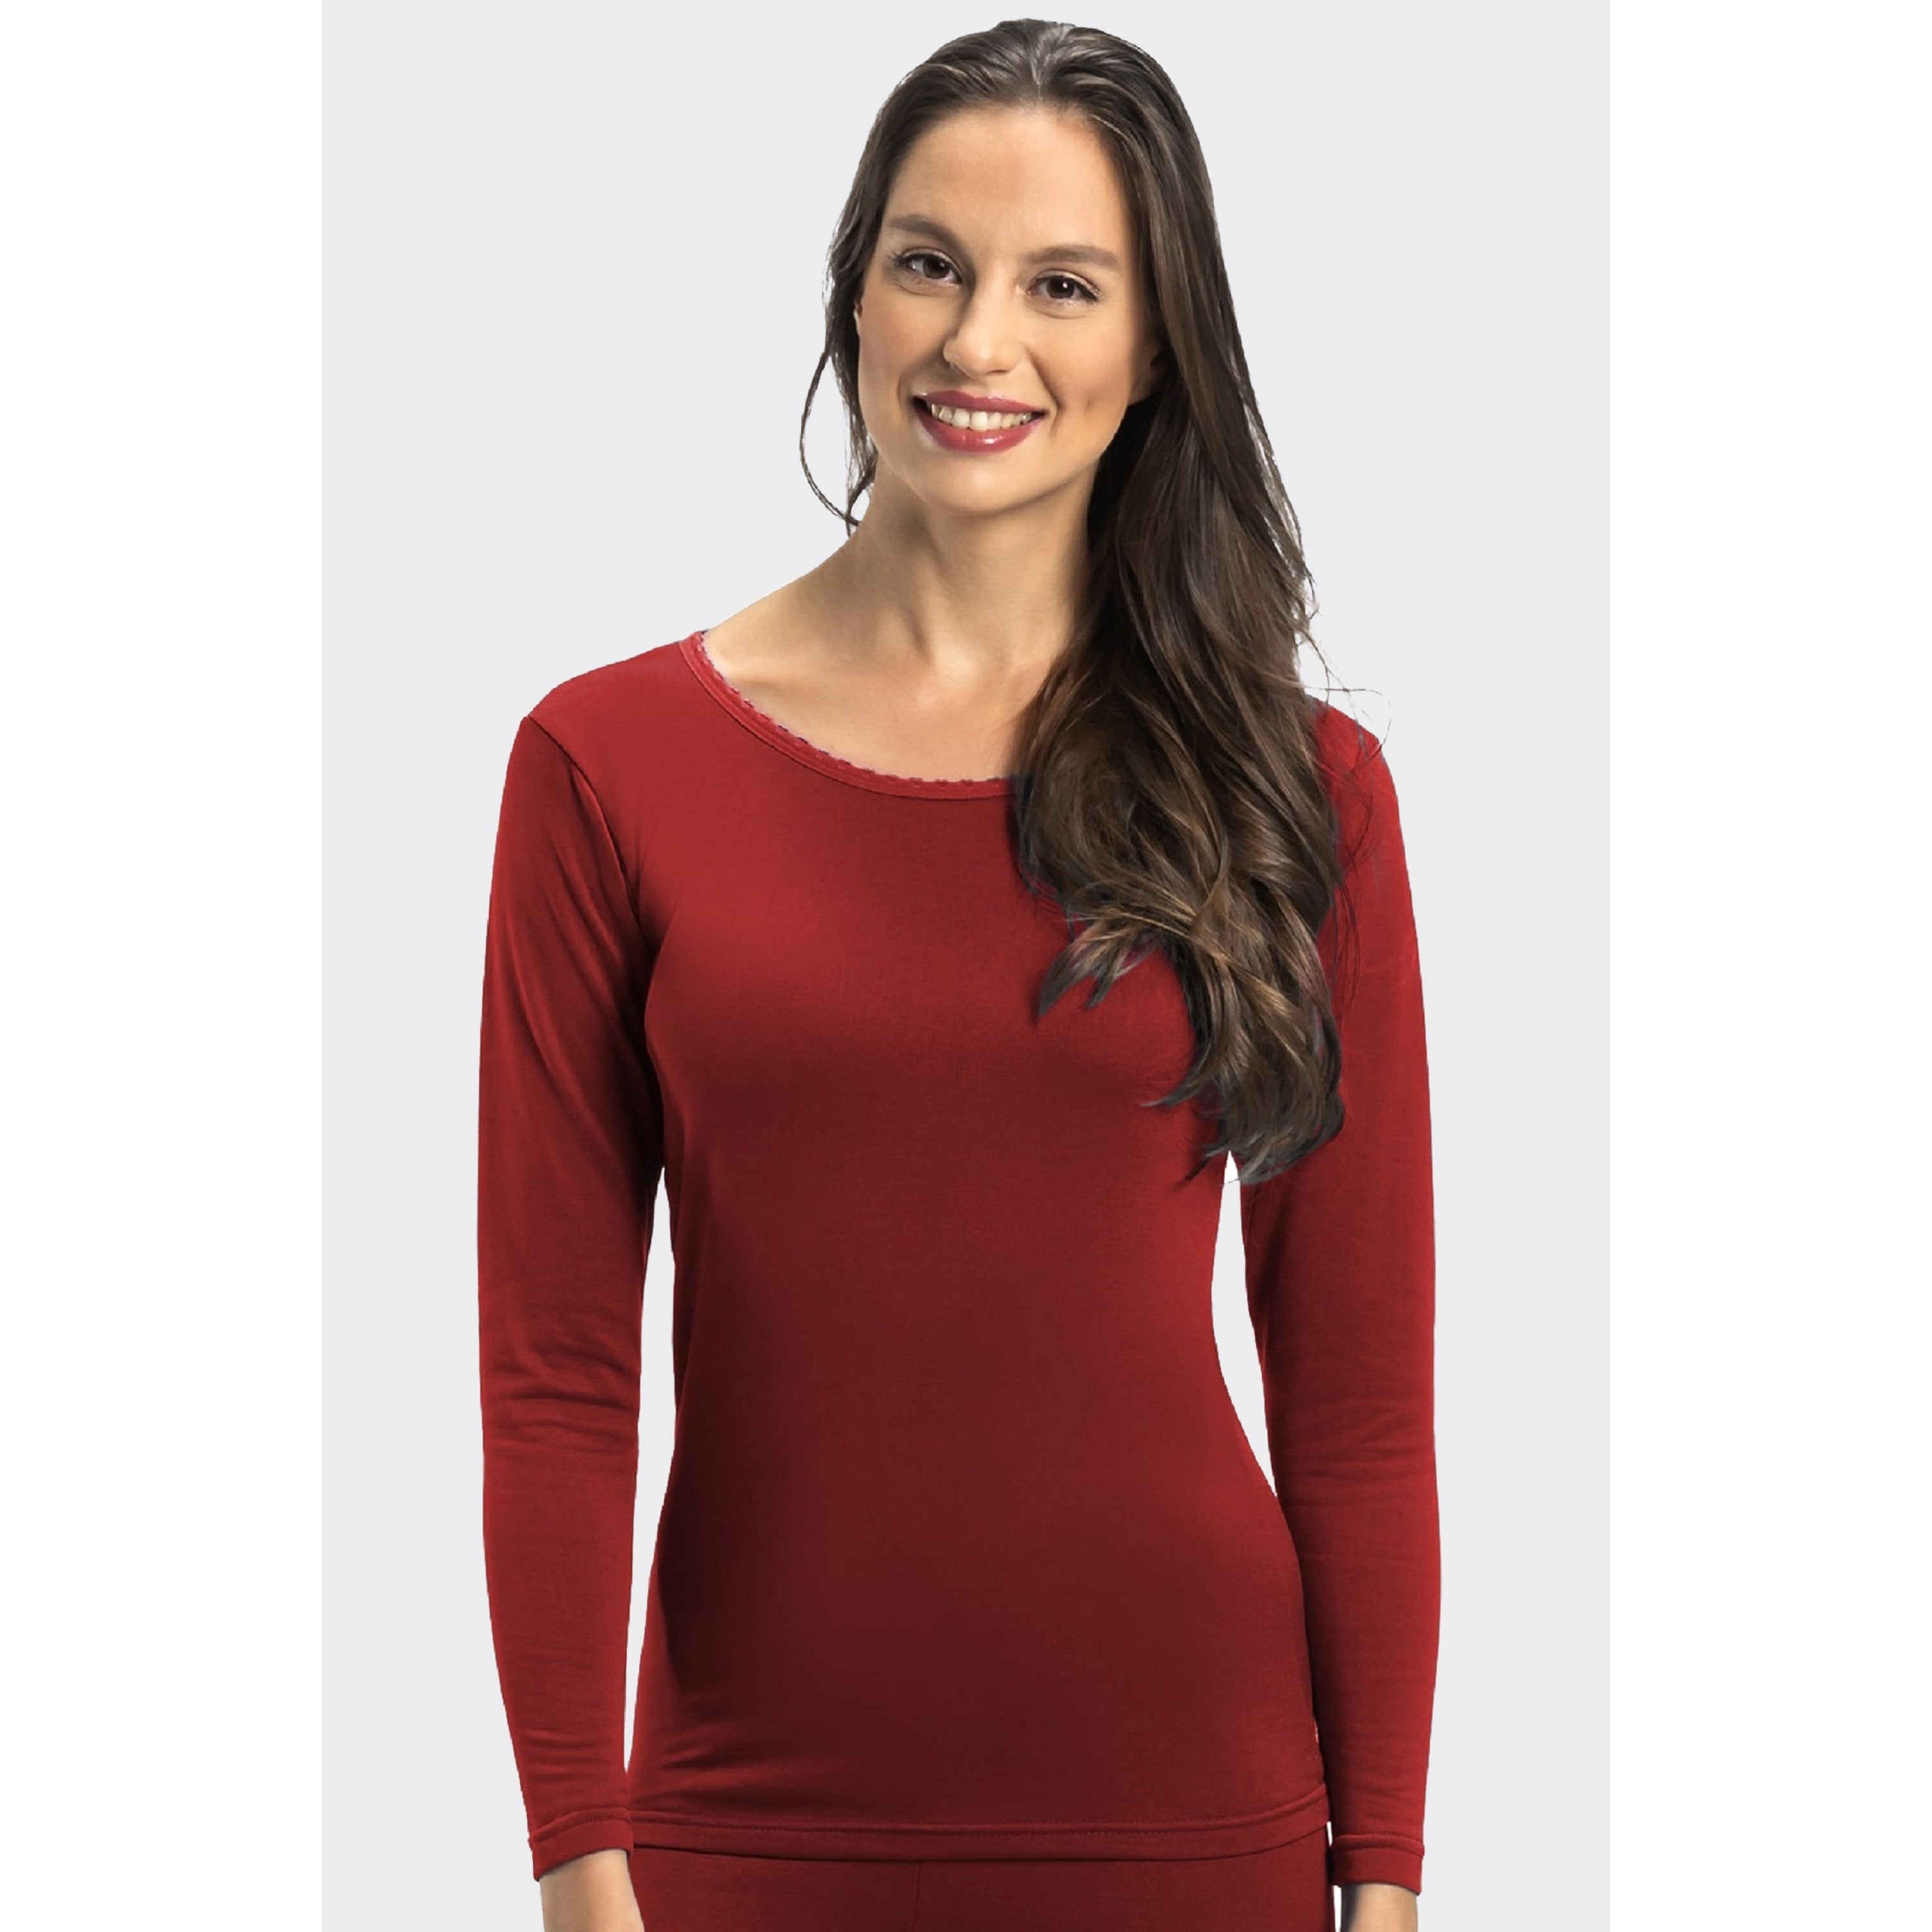 Ultra Soft Womens Thermal Cheap Polos Base Layer Fleece Lined Sleeveless Top  For Winter Sleepwear From Pipa, $14.77